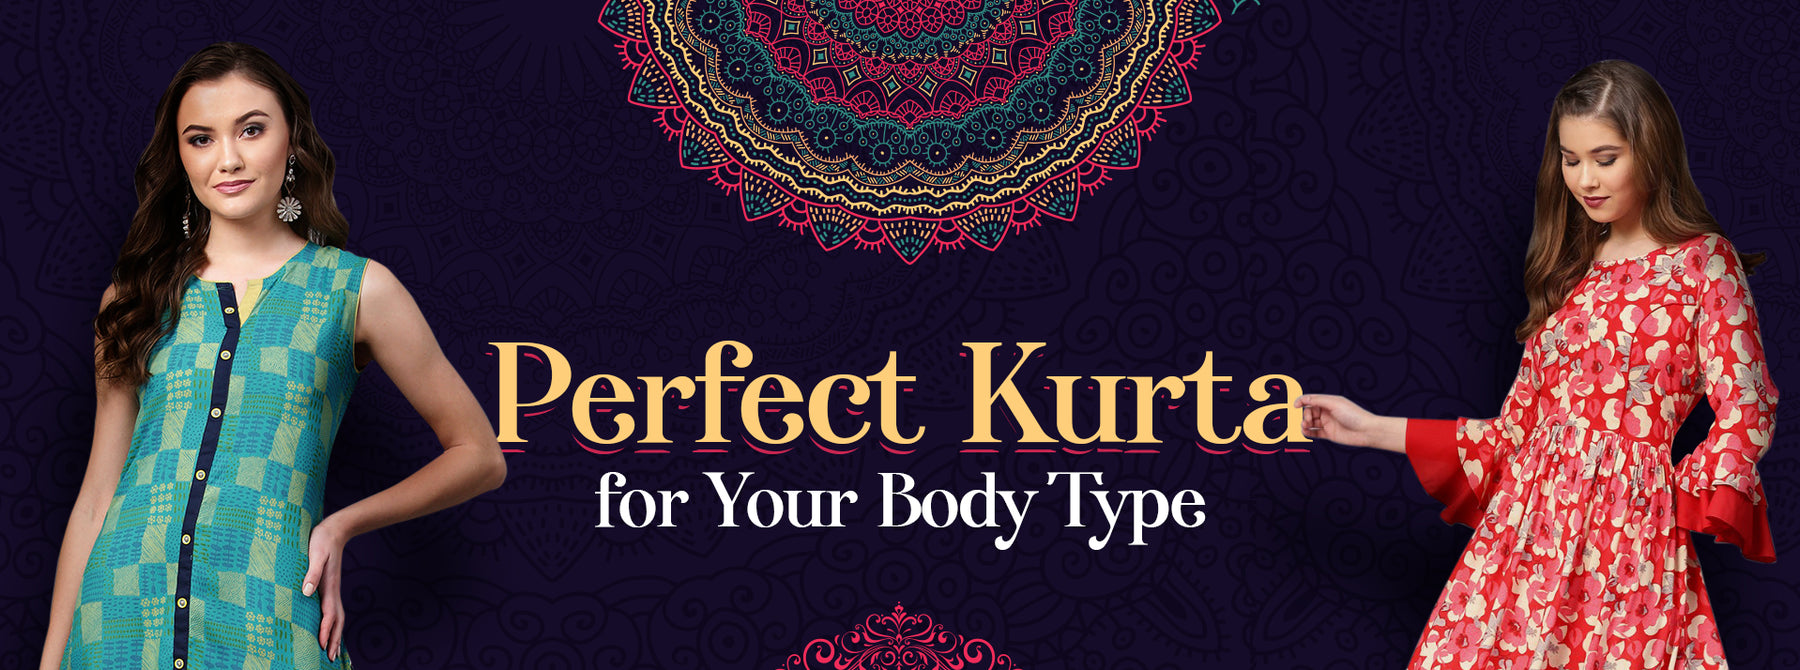 Know your Body Type and Choose the Perfect Kurta